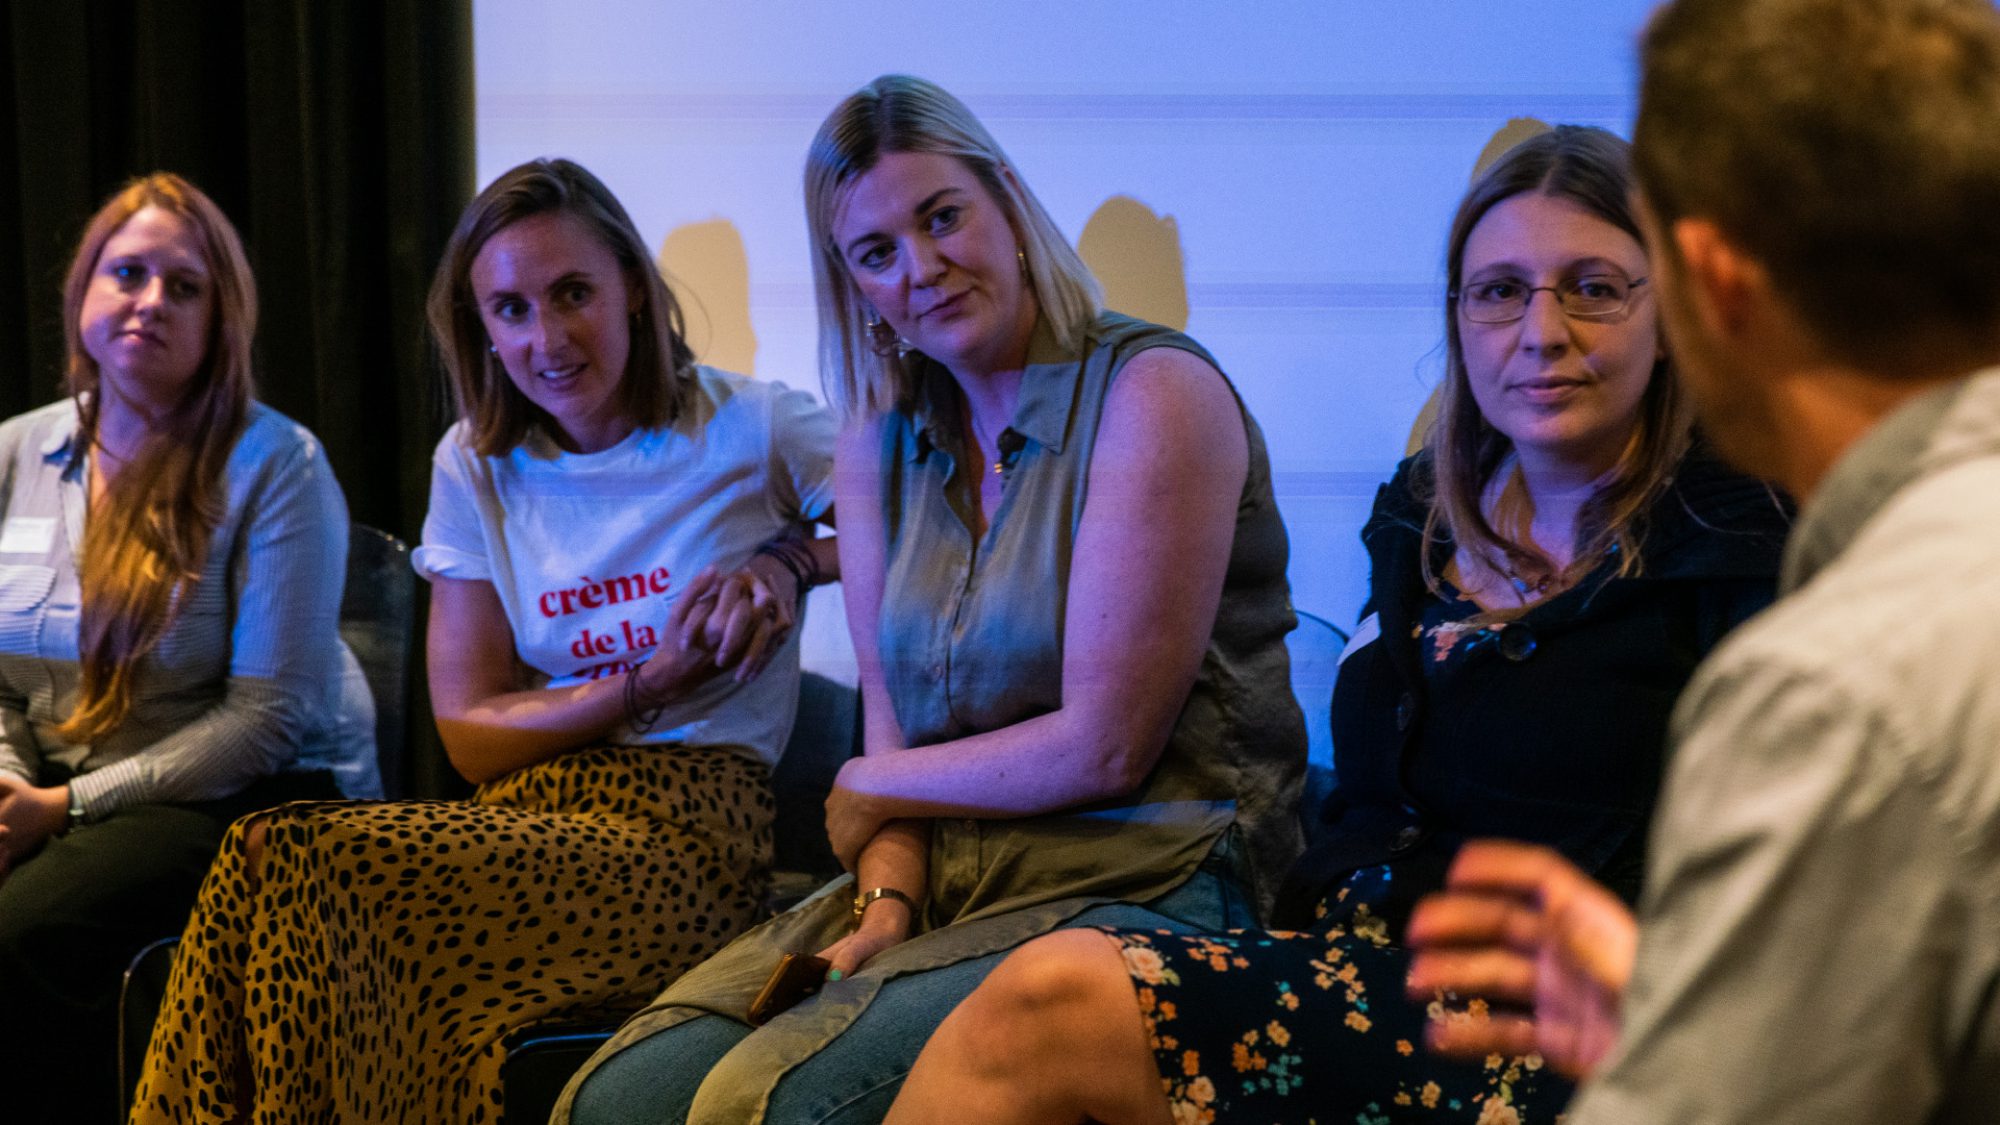 Panel speakers discuss integrated campaigns at Relay by Raw London event in September 2019